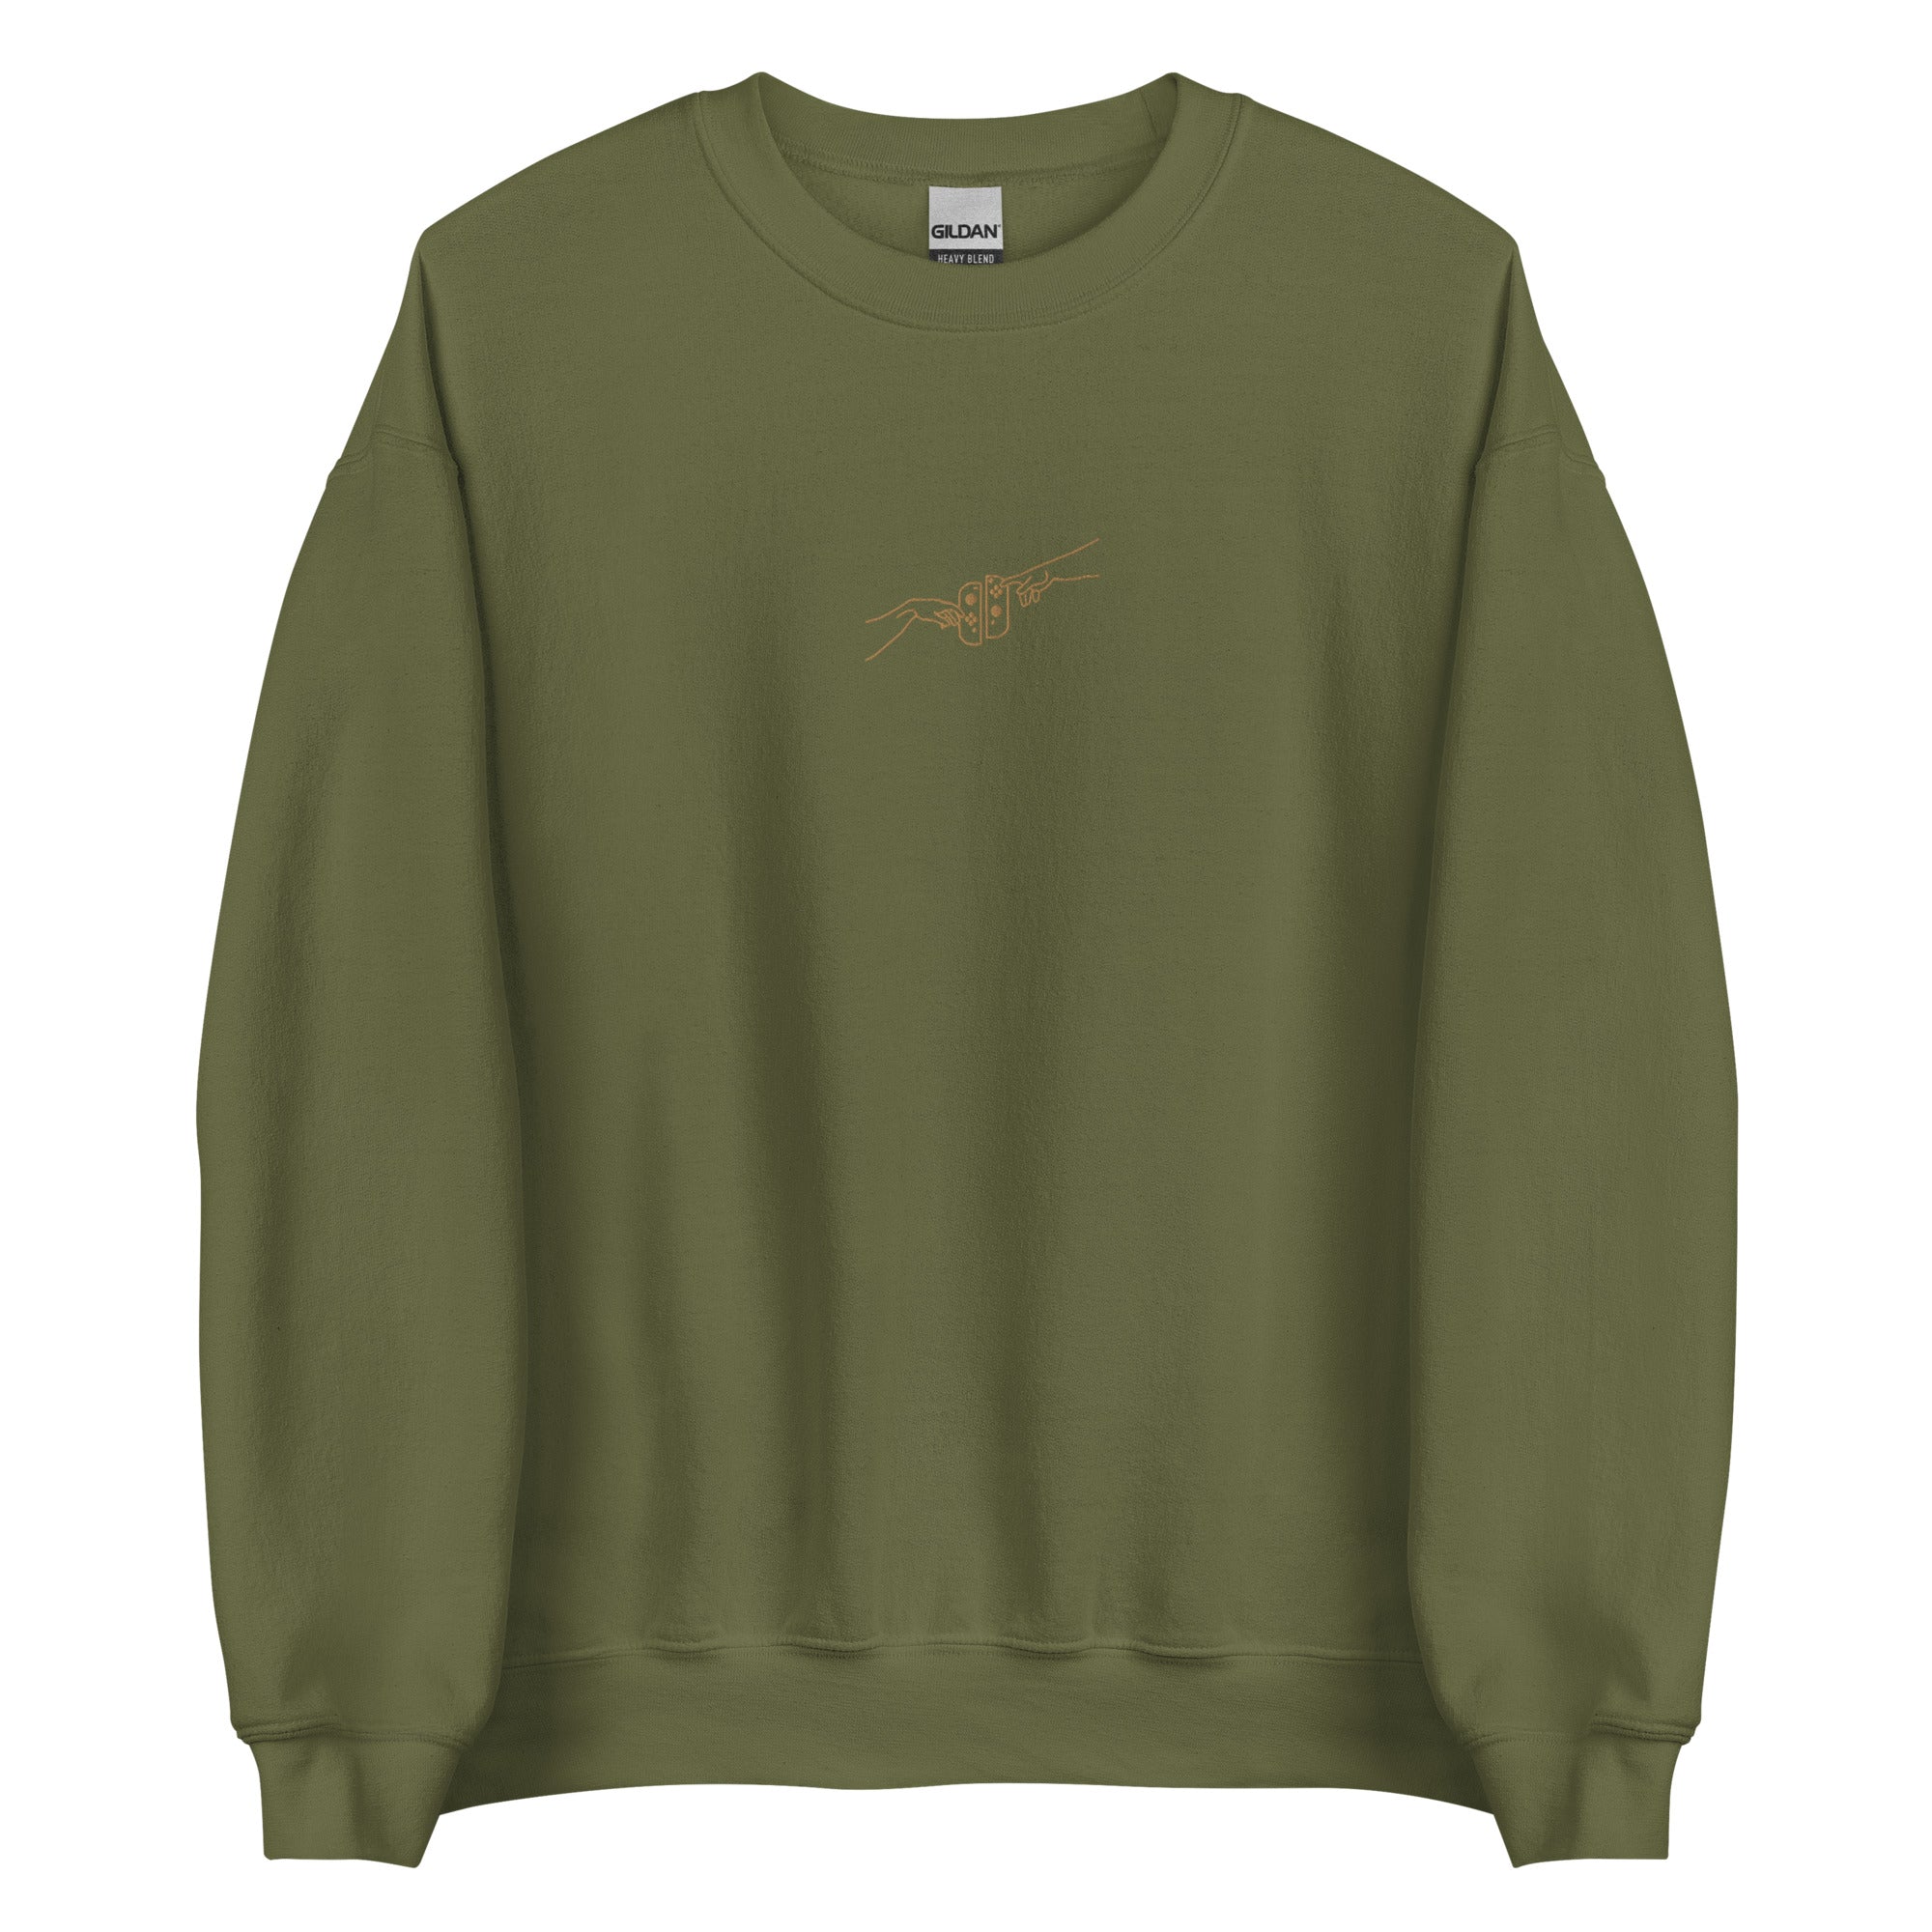 The Creation of Switch | Embroidered Unisex Sweatshirt | Cozy Gamer Threads and Thistles Inventory Military Green S 